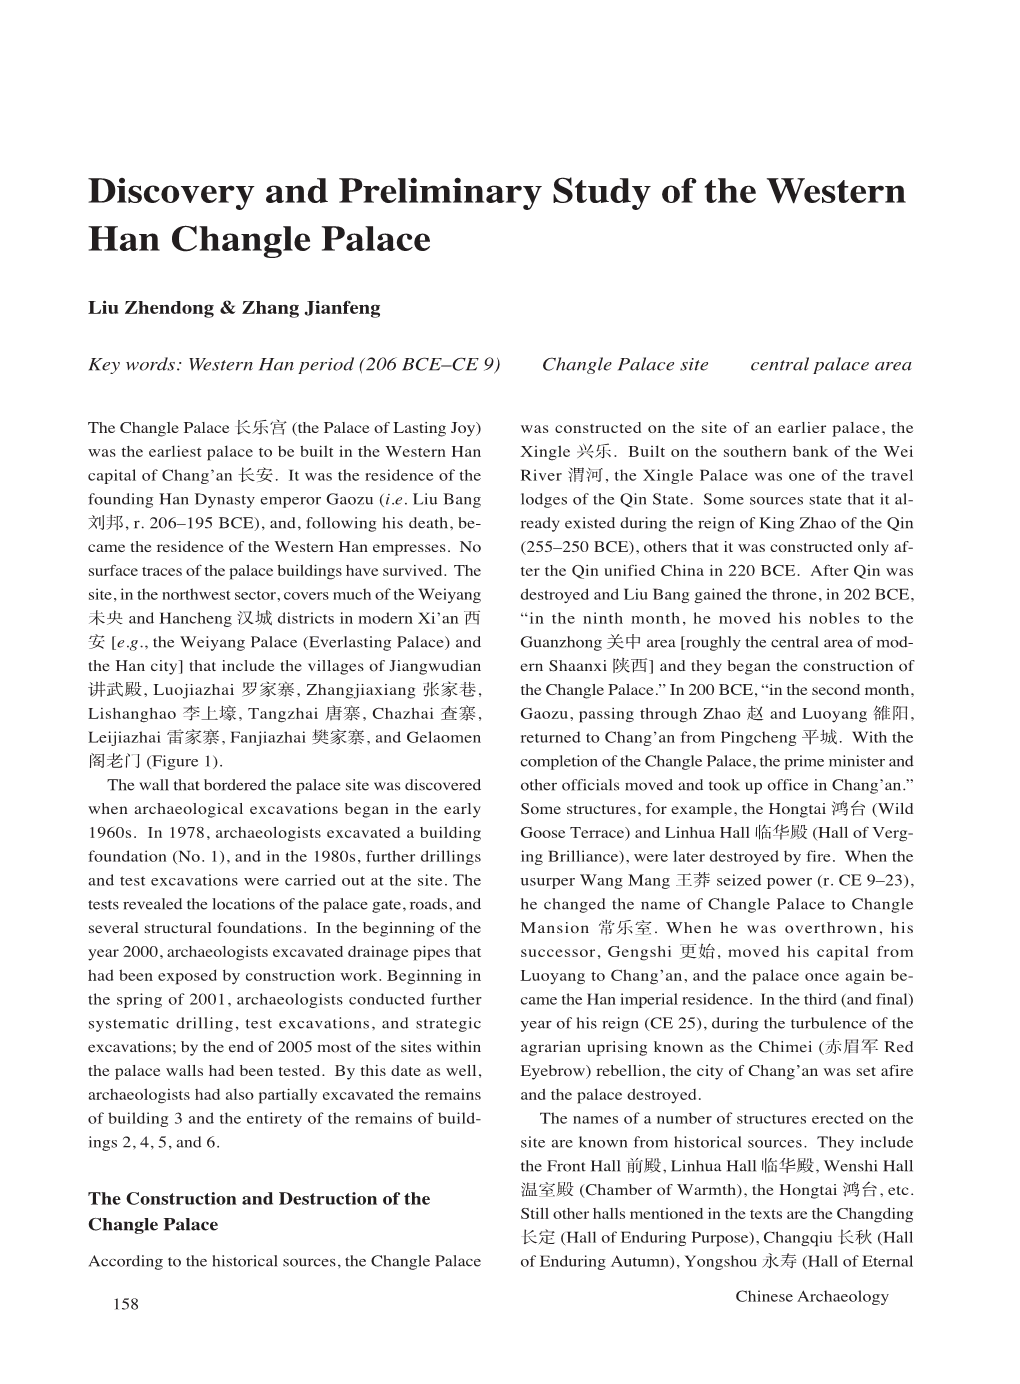 Discovery and Preliminary Study of the Western Han Changle Palace